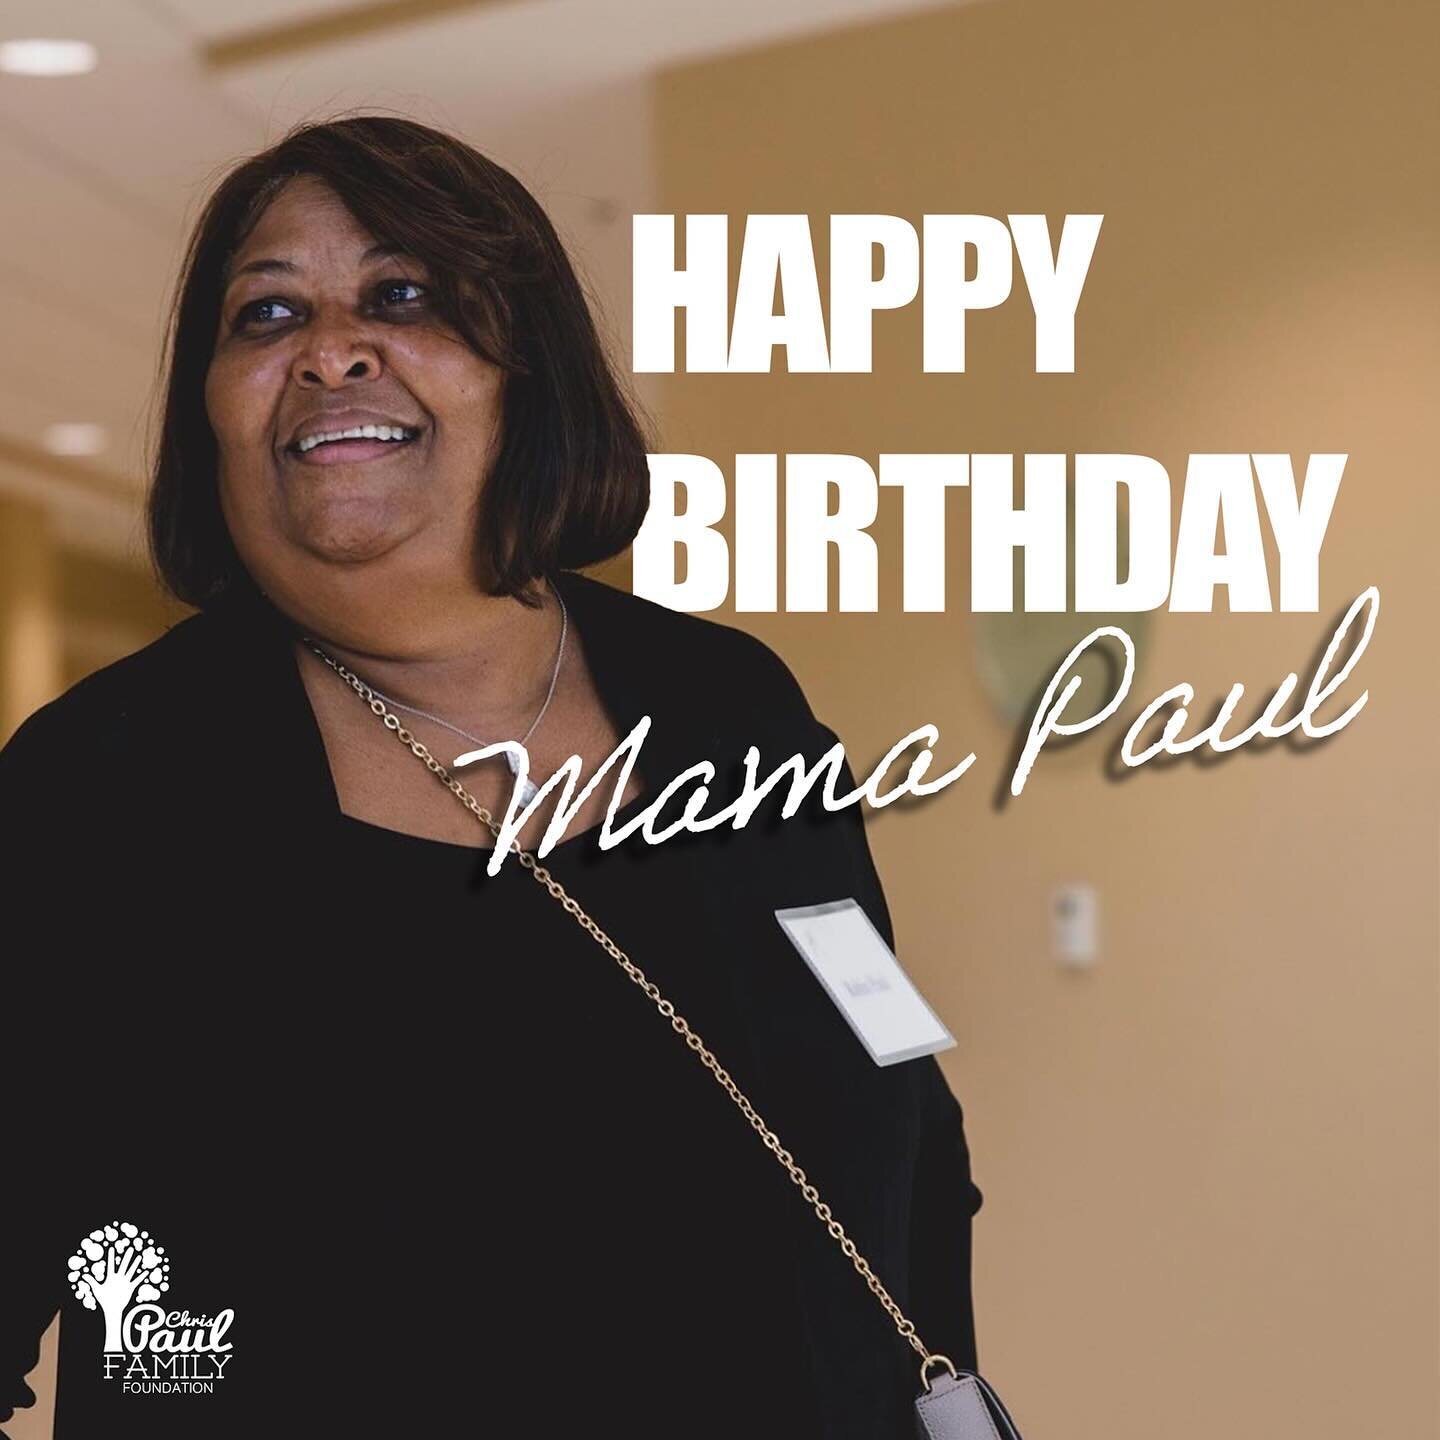 To know her is to love her🩷 Help us wish @mamapaul3 the happiest of birthdays! 🎉🥳🎈